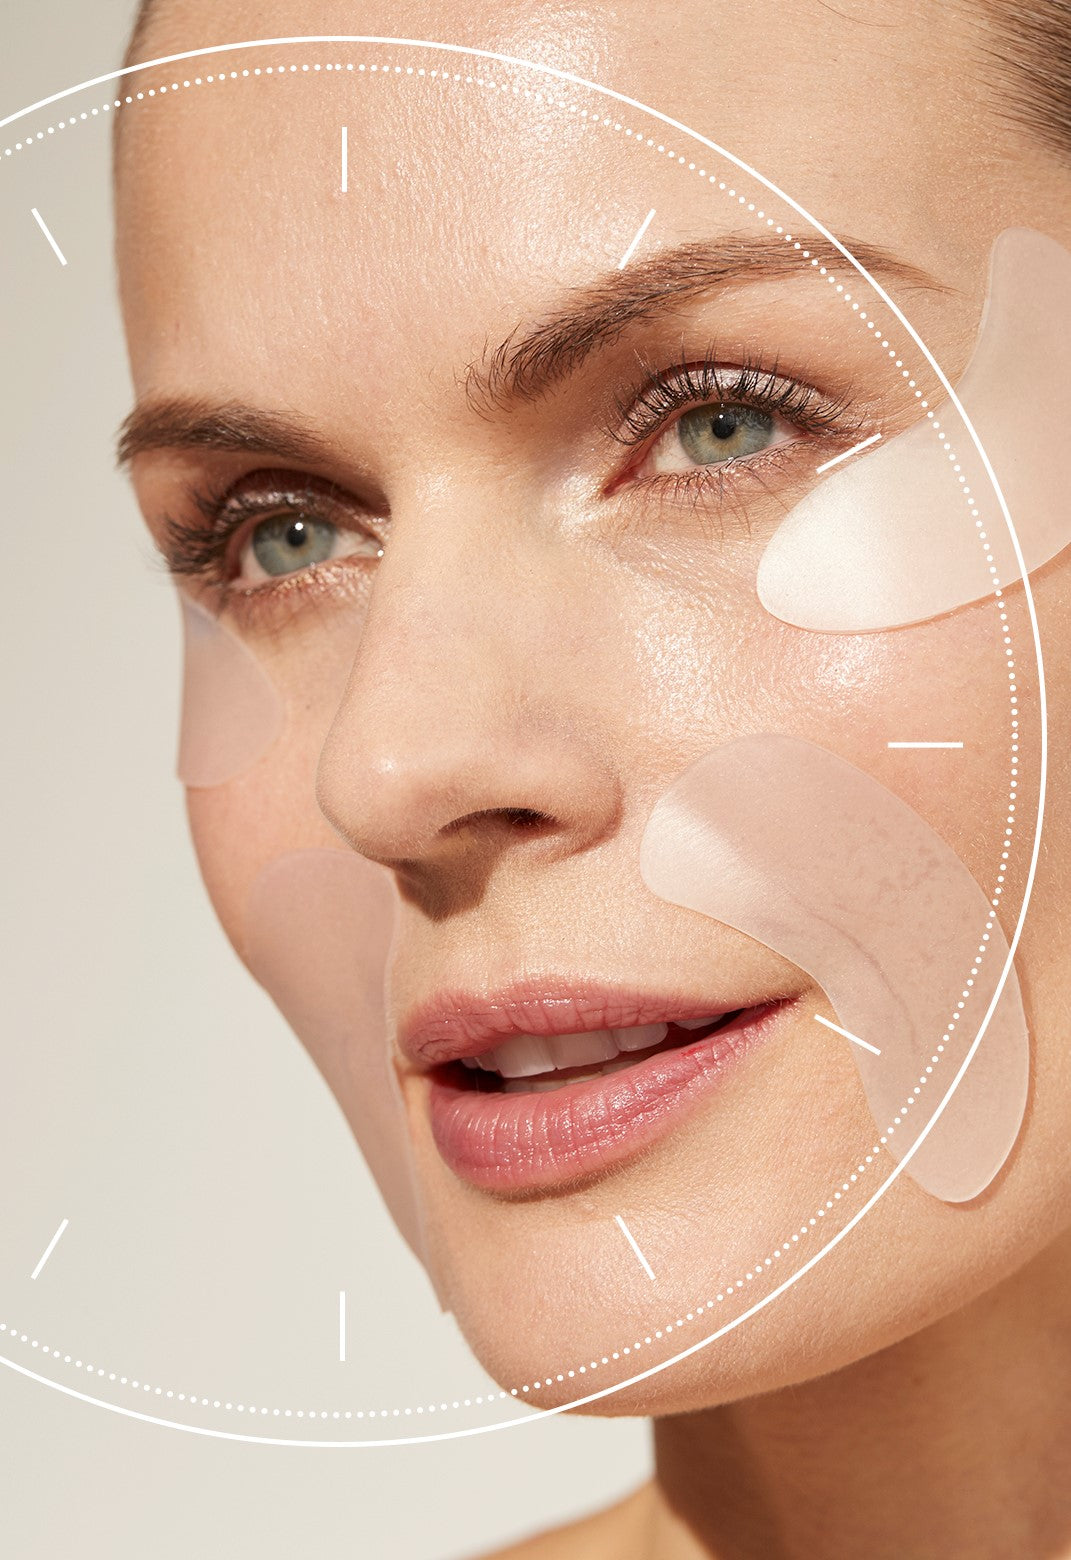 Non-Injectable Wrinkle Prevention - Is It Possible?